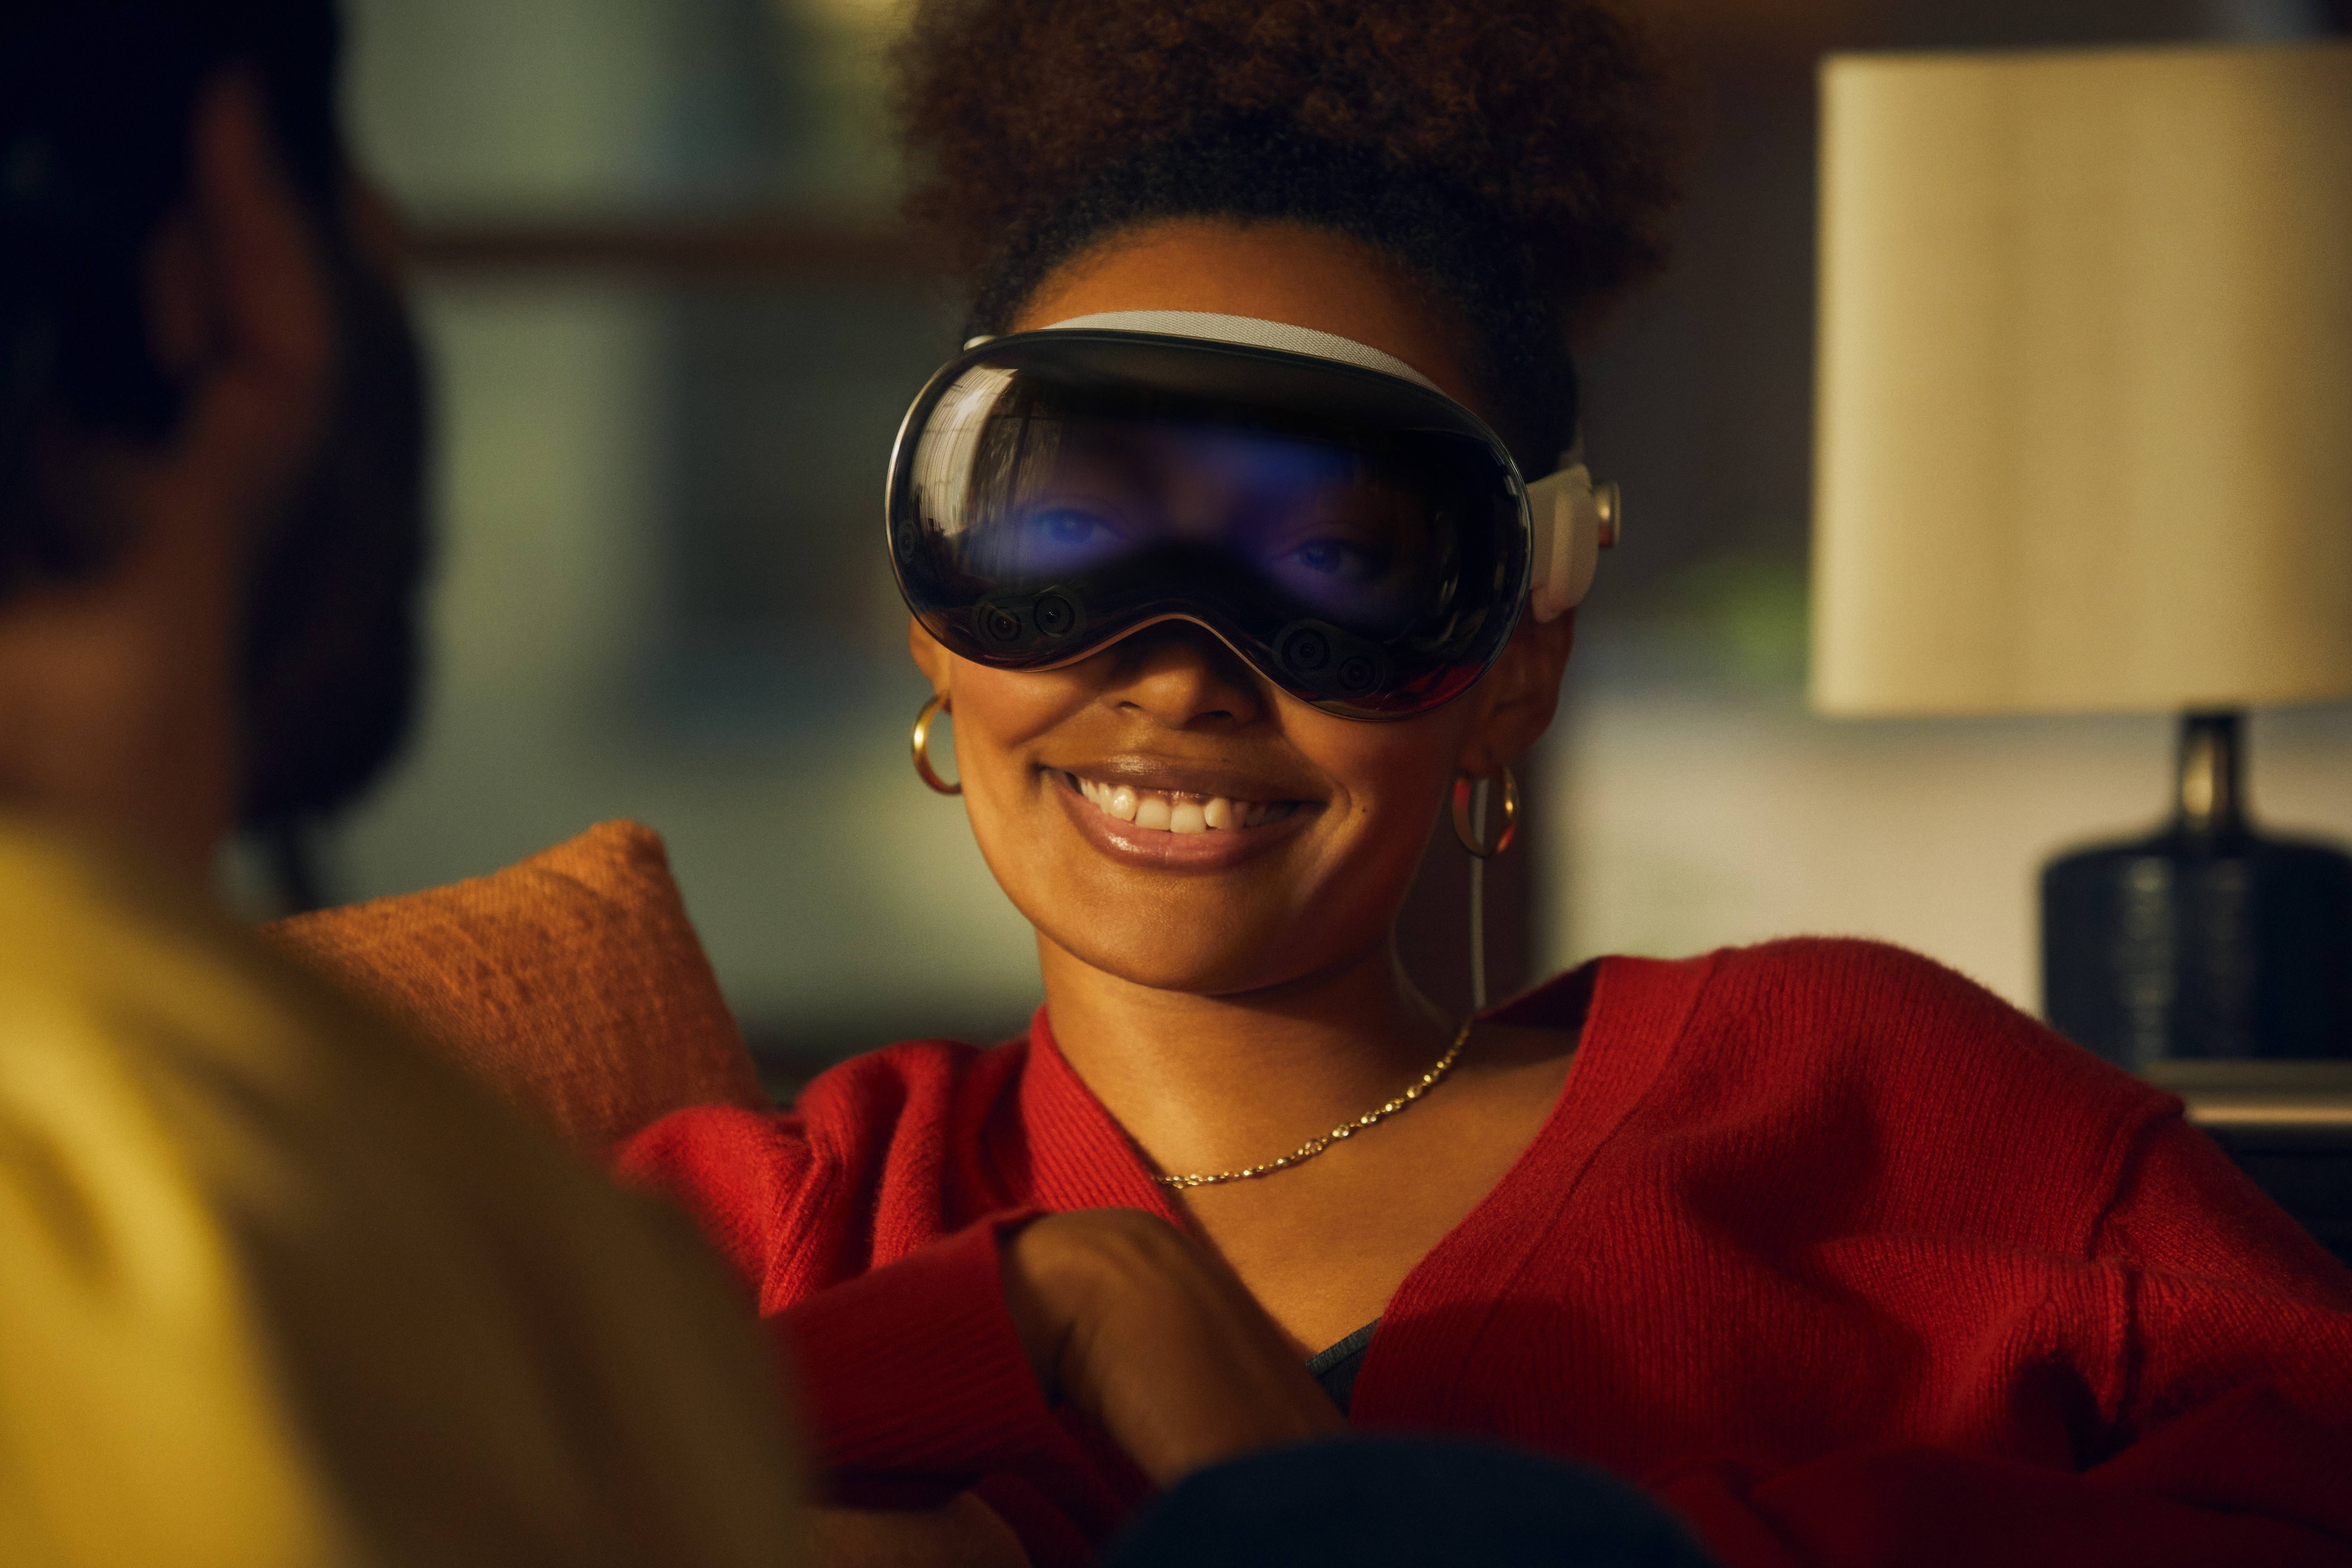 Disney is partnering with Apple to launch Vision Pro Augmented Reality headset, including a virtual Walt Disney World